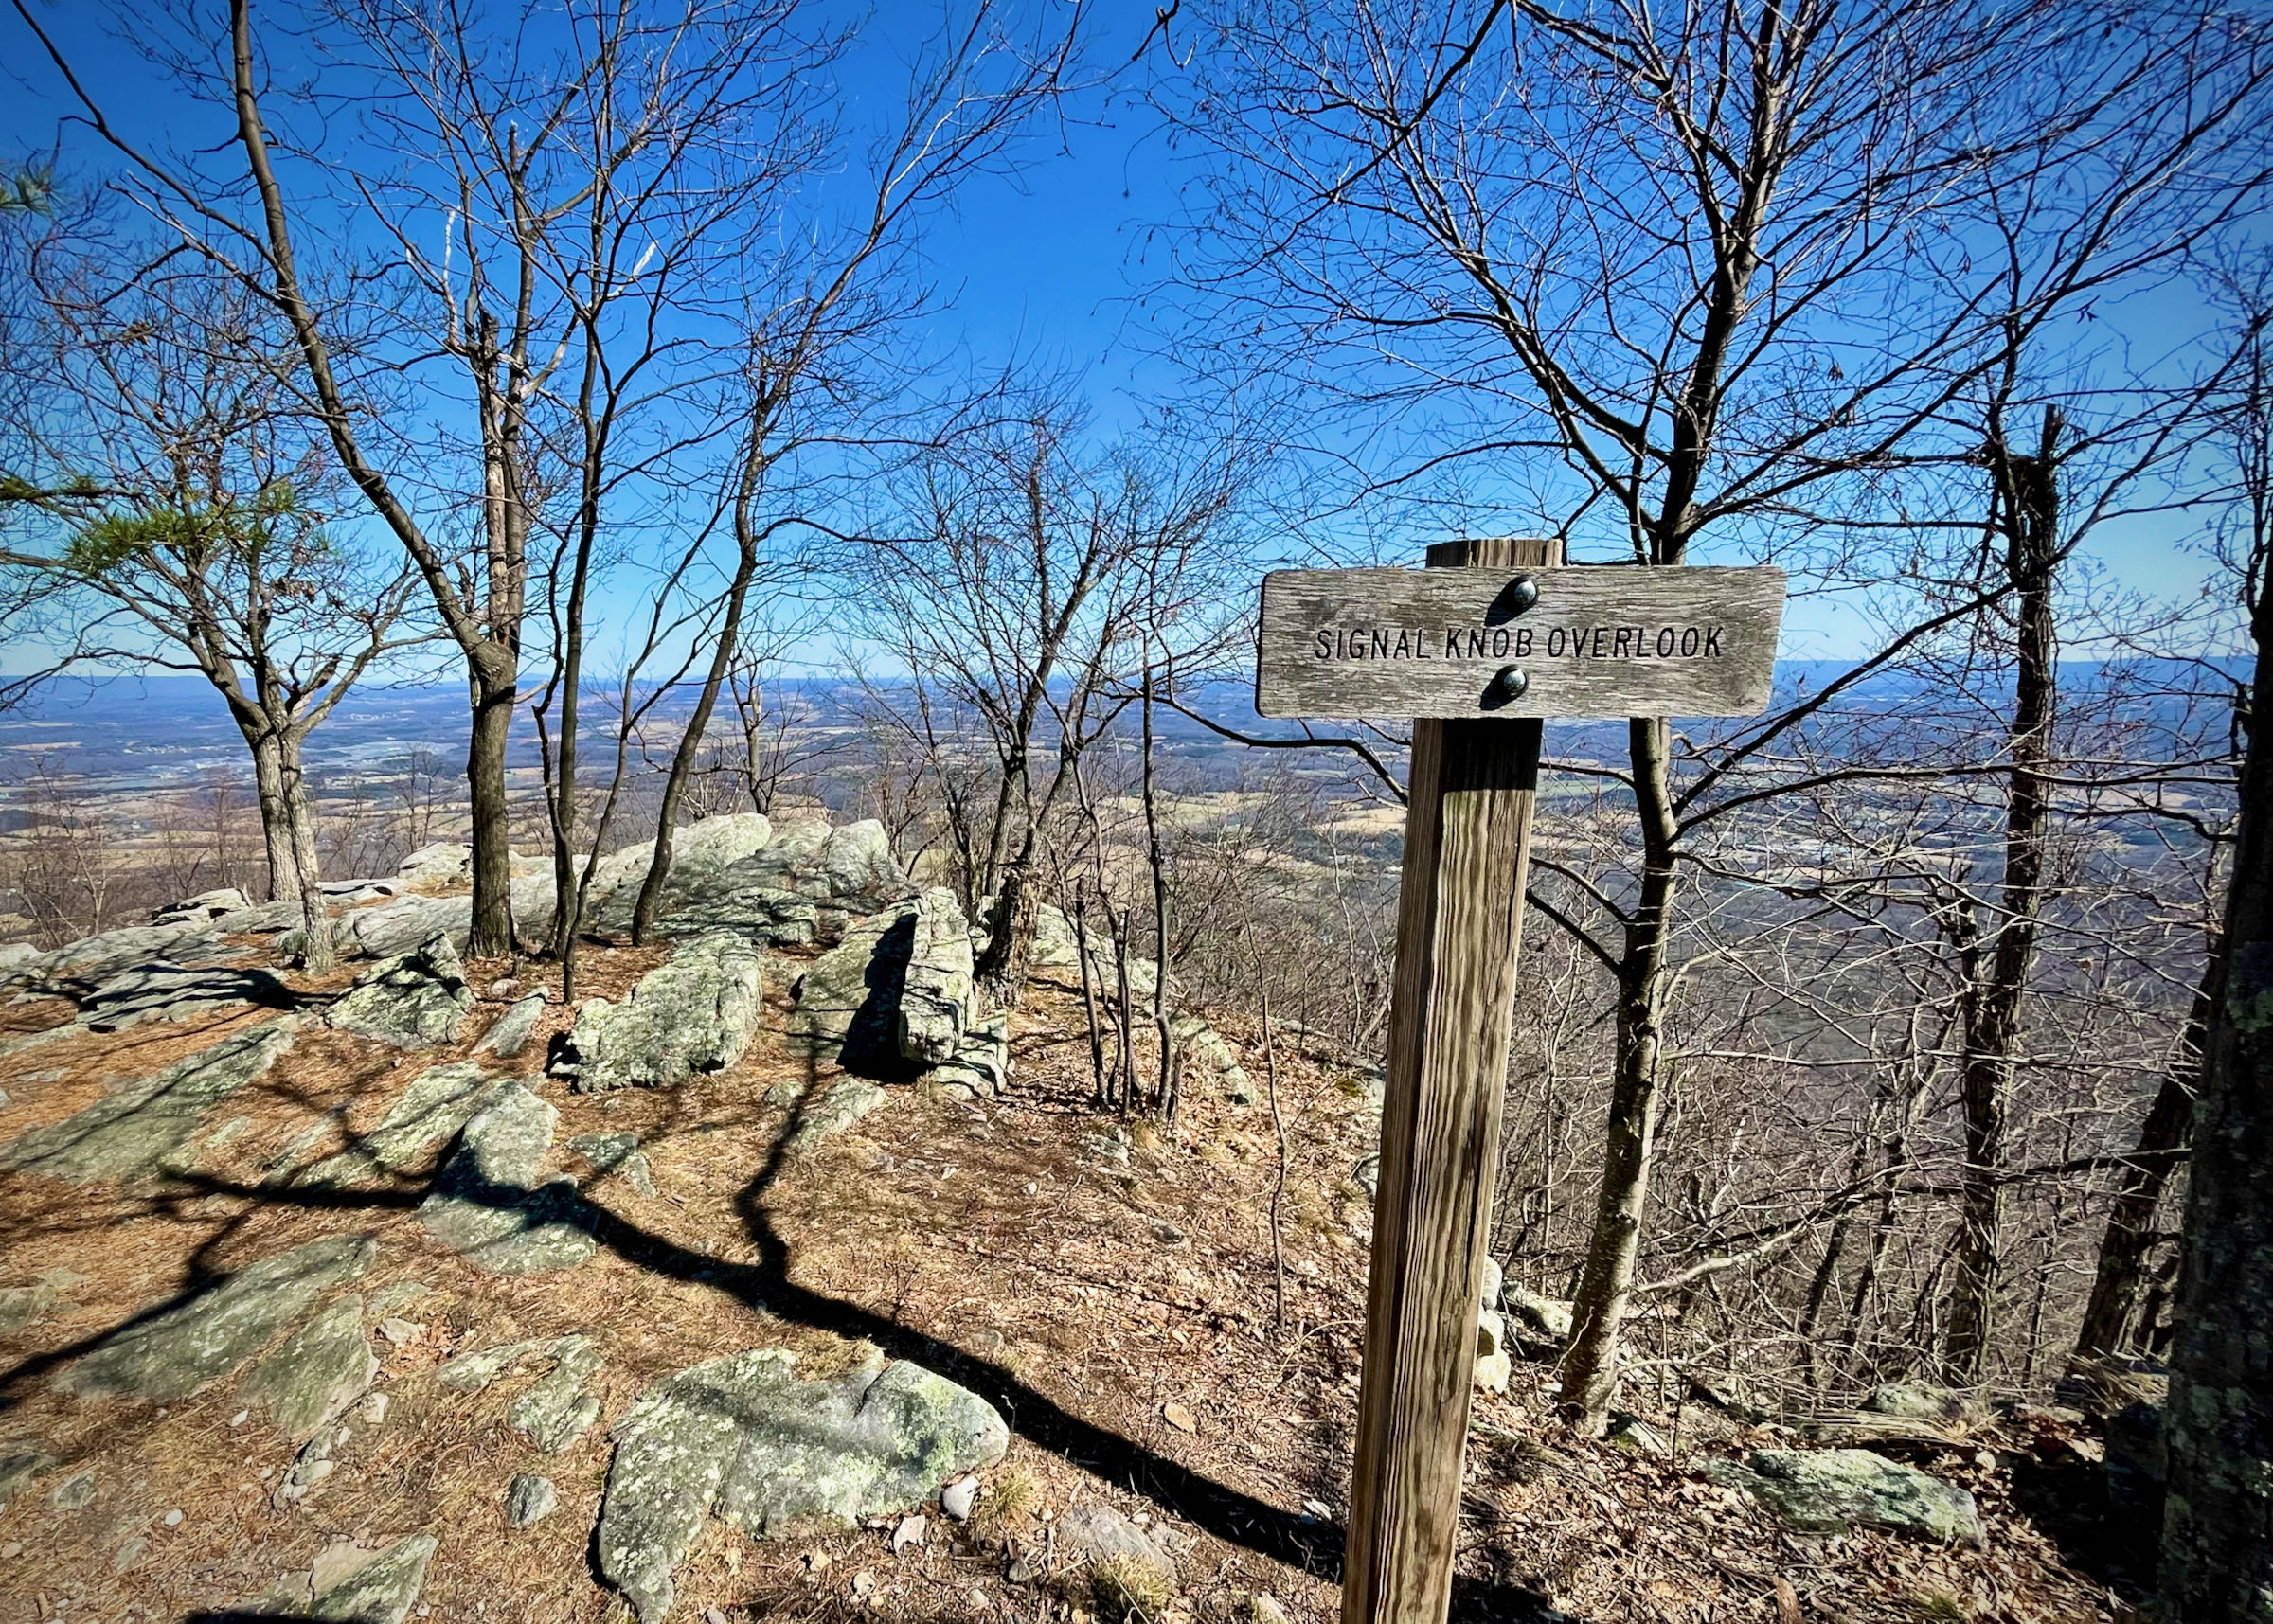 The view from Signal Knob